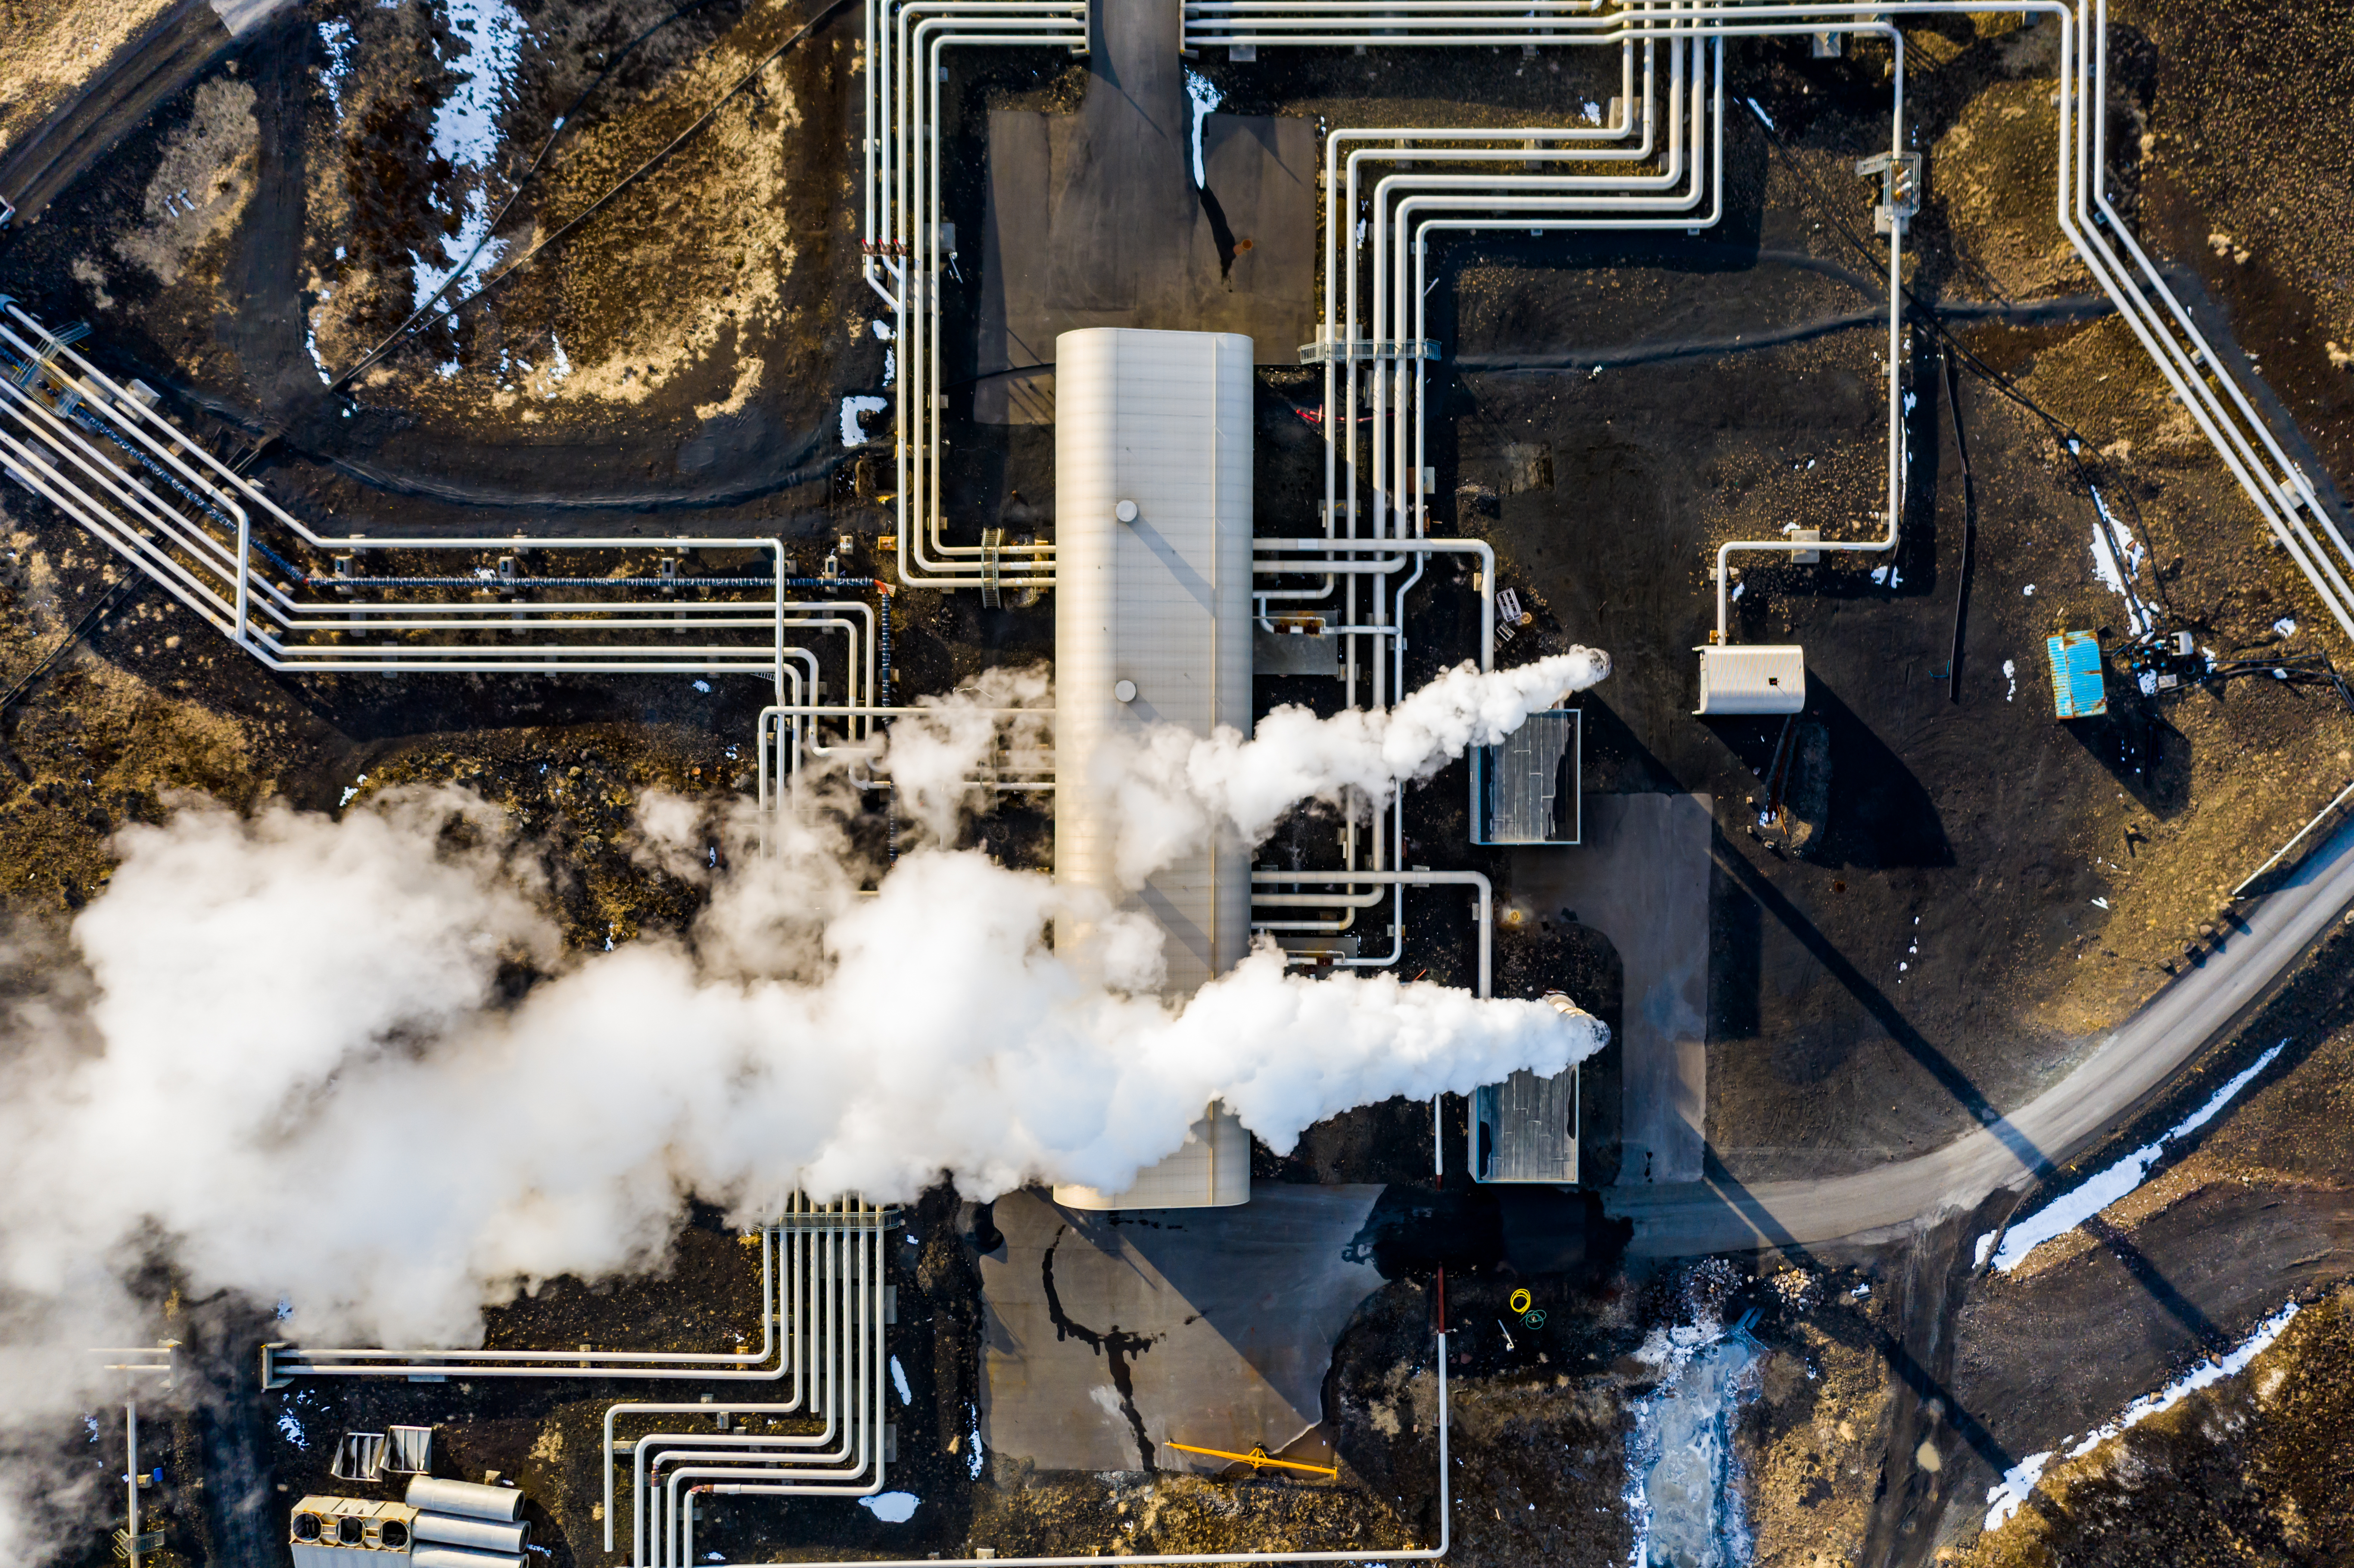 Photograph of Geothermal power plant located at Reykjanes peninsula in Iceland. Aerial view